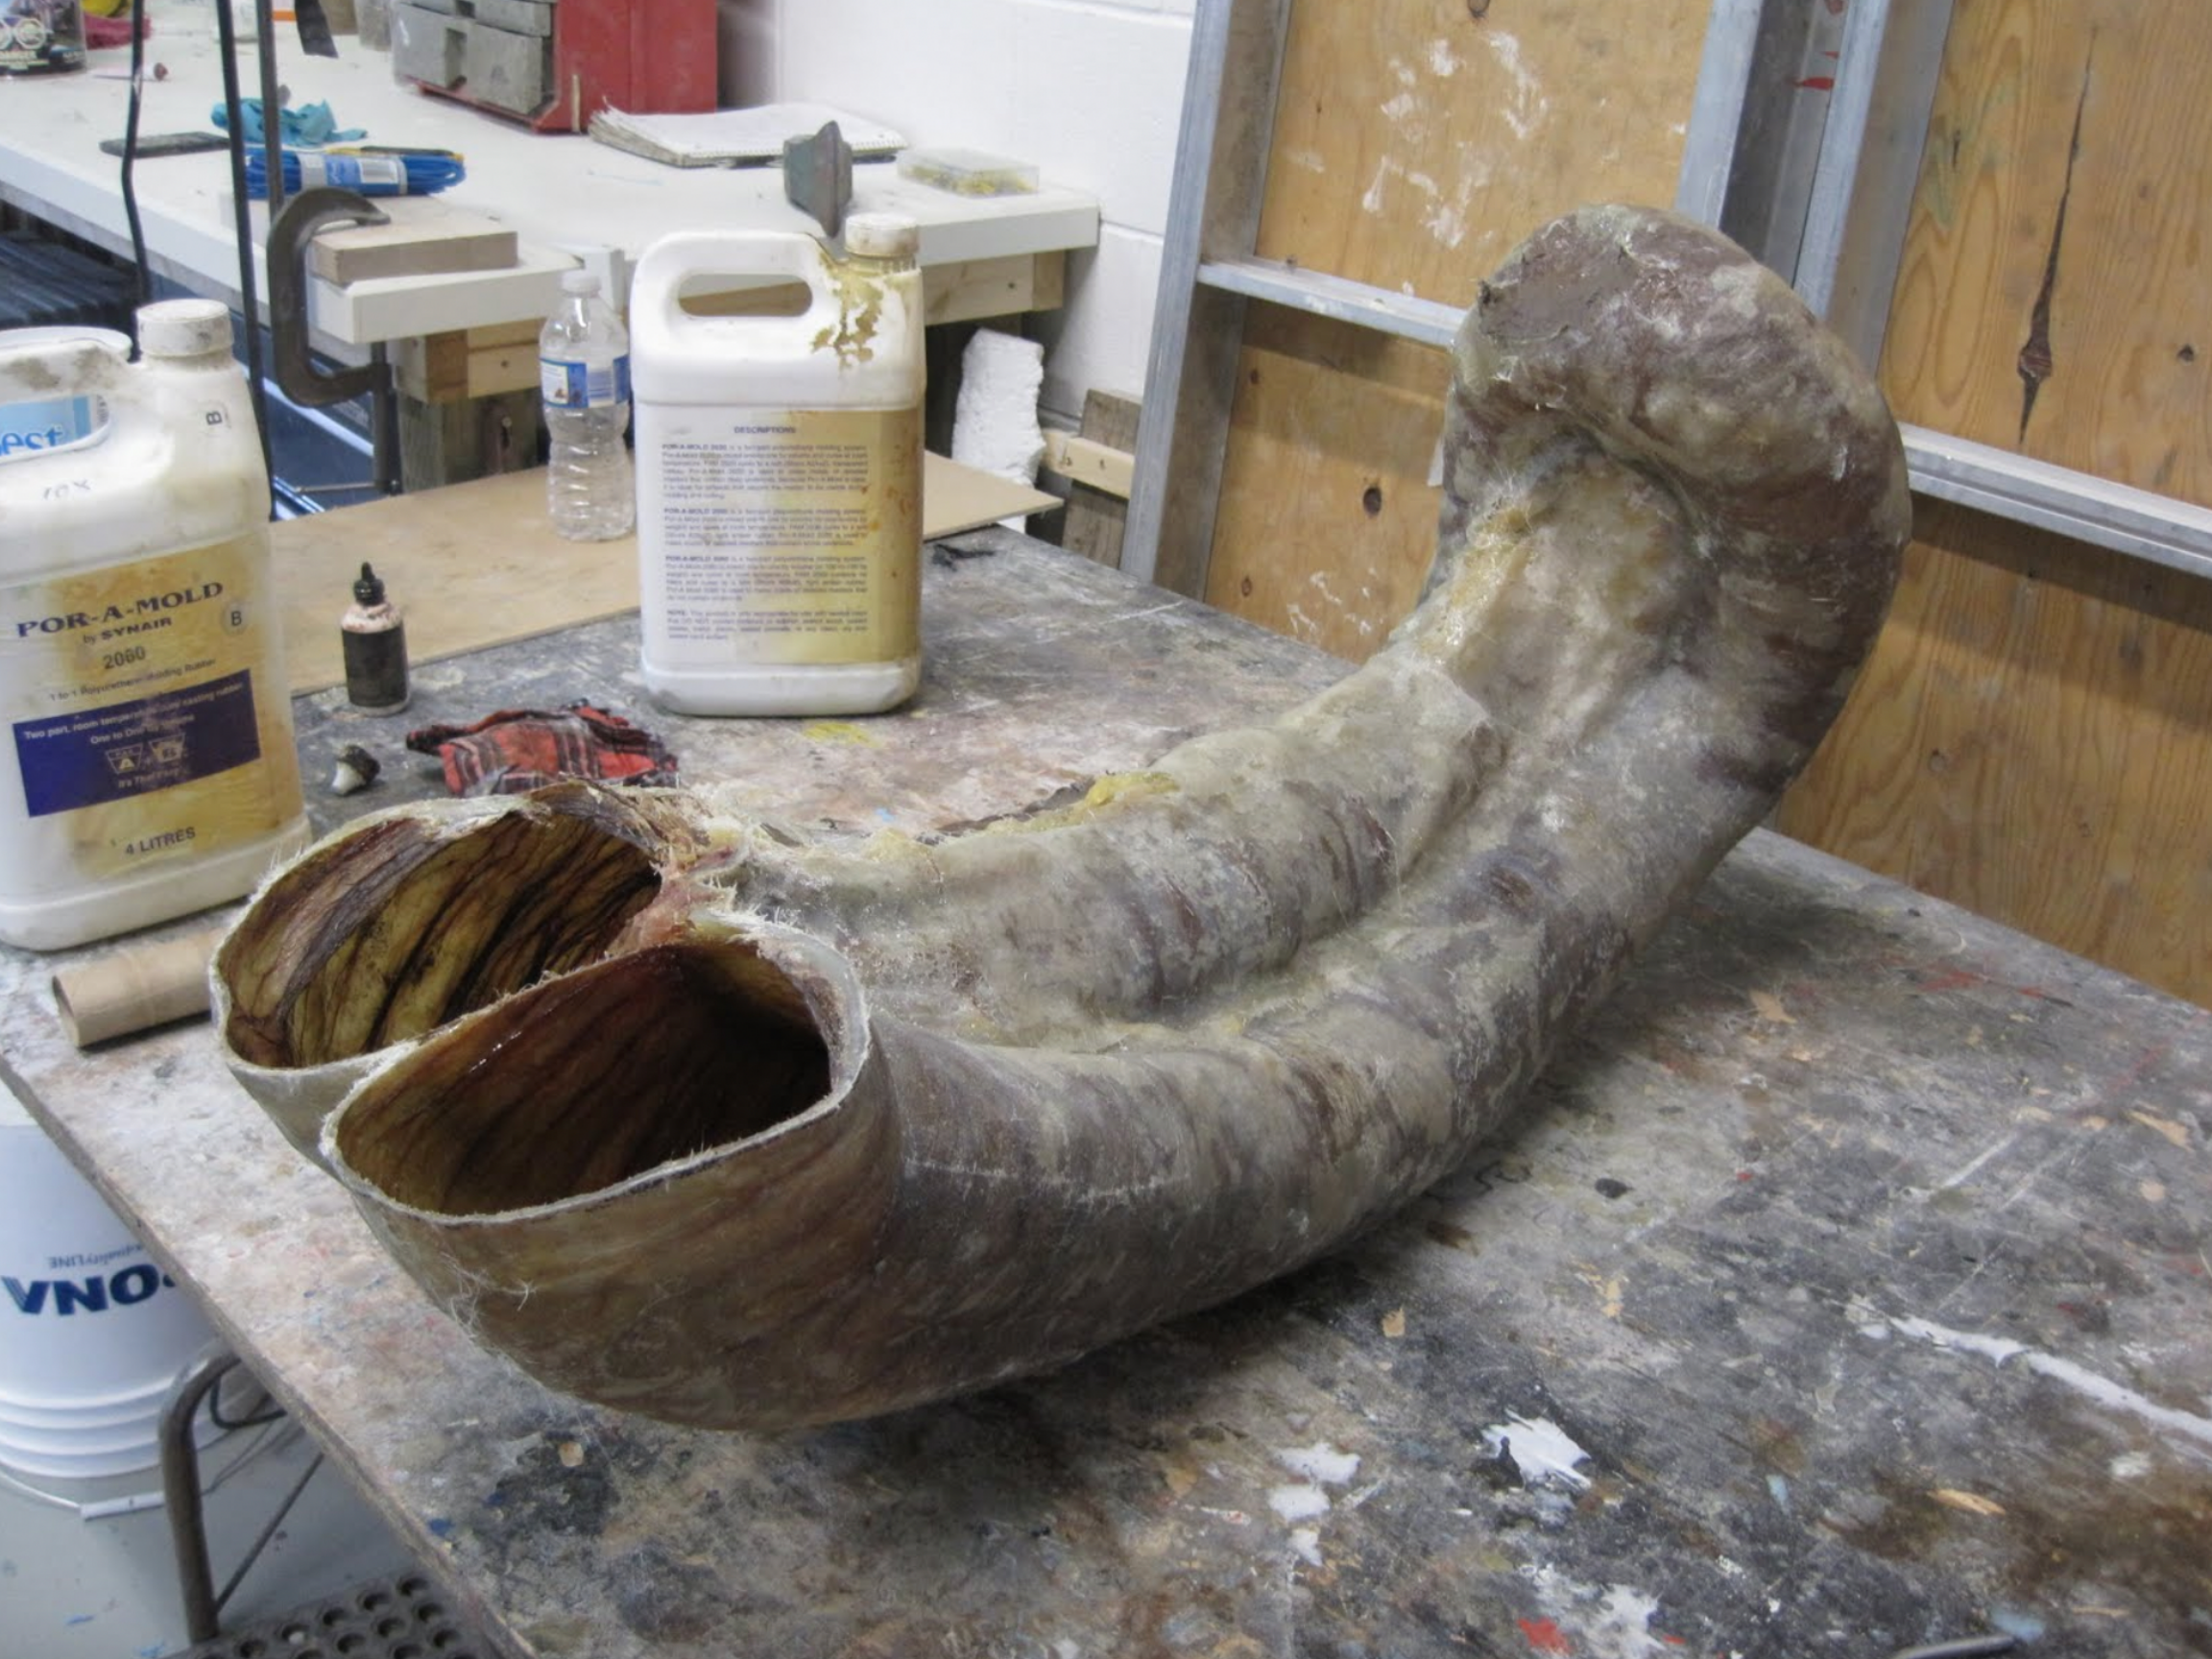 Portion of equine large intestine that will be reproduced to create an equine colic simulator for The University of Calgary Faculty of Veterinary Medicine.